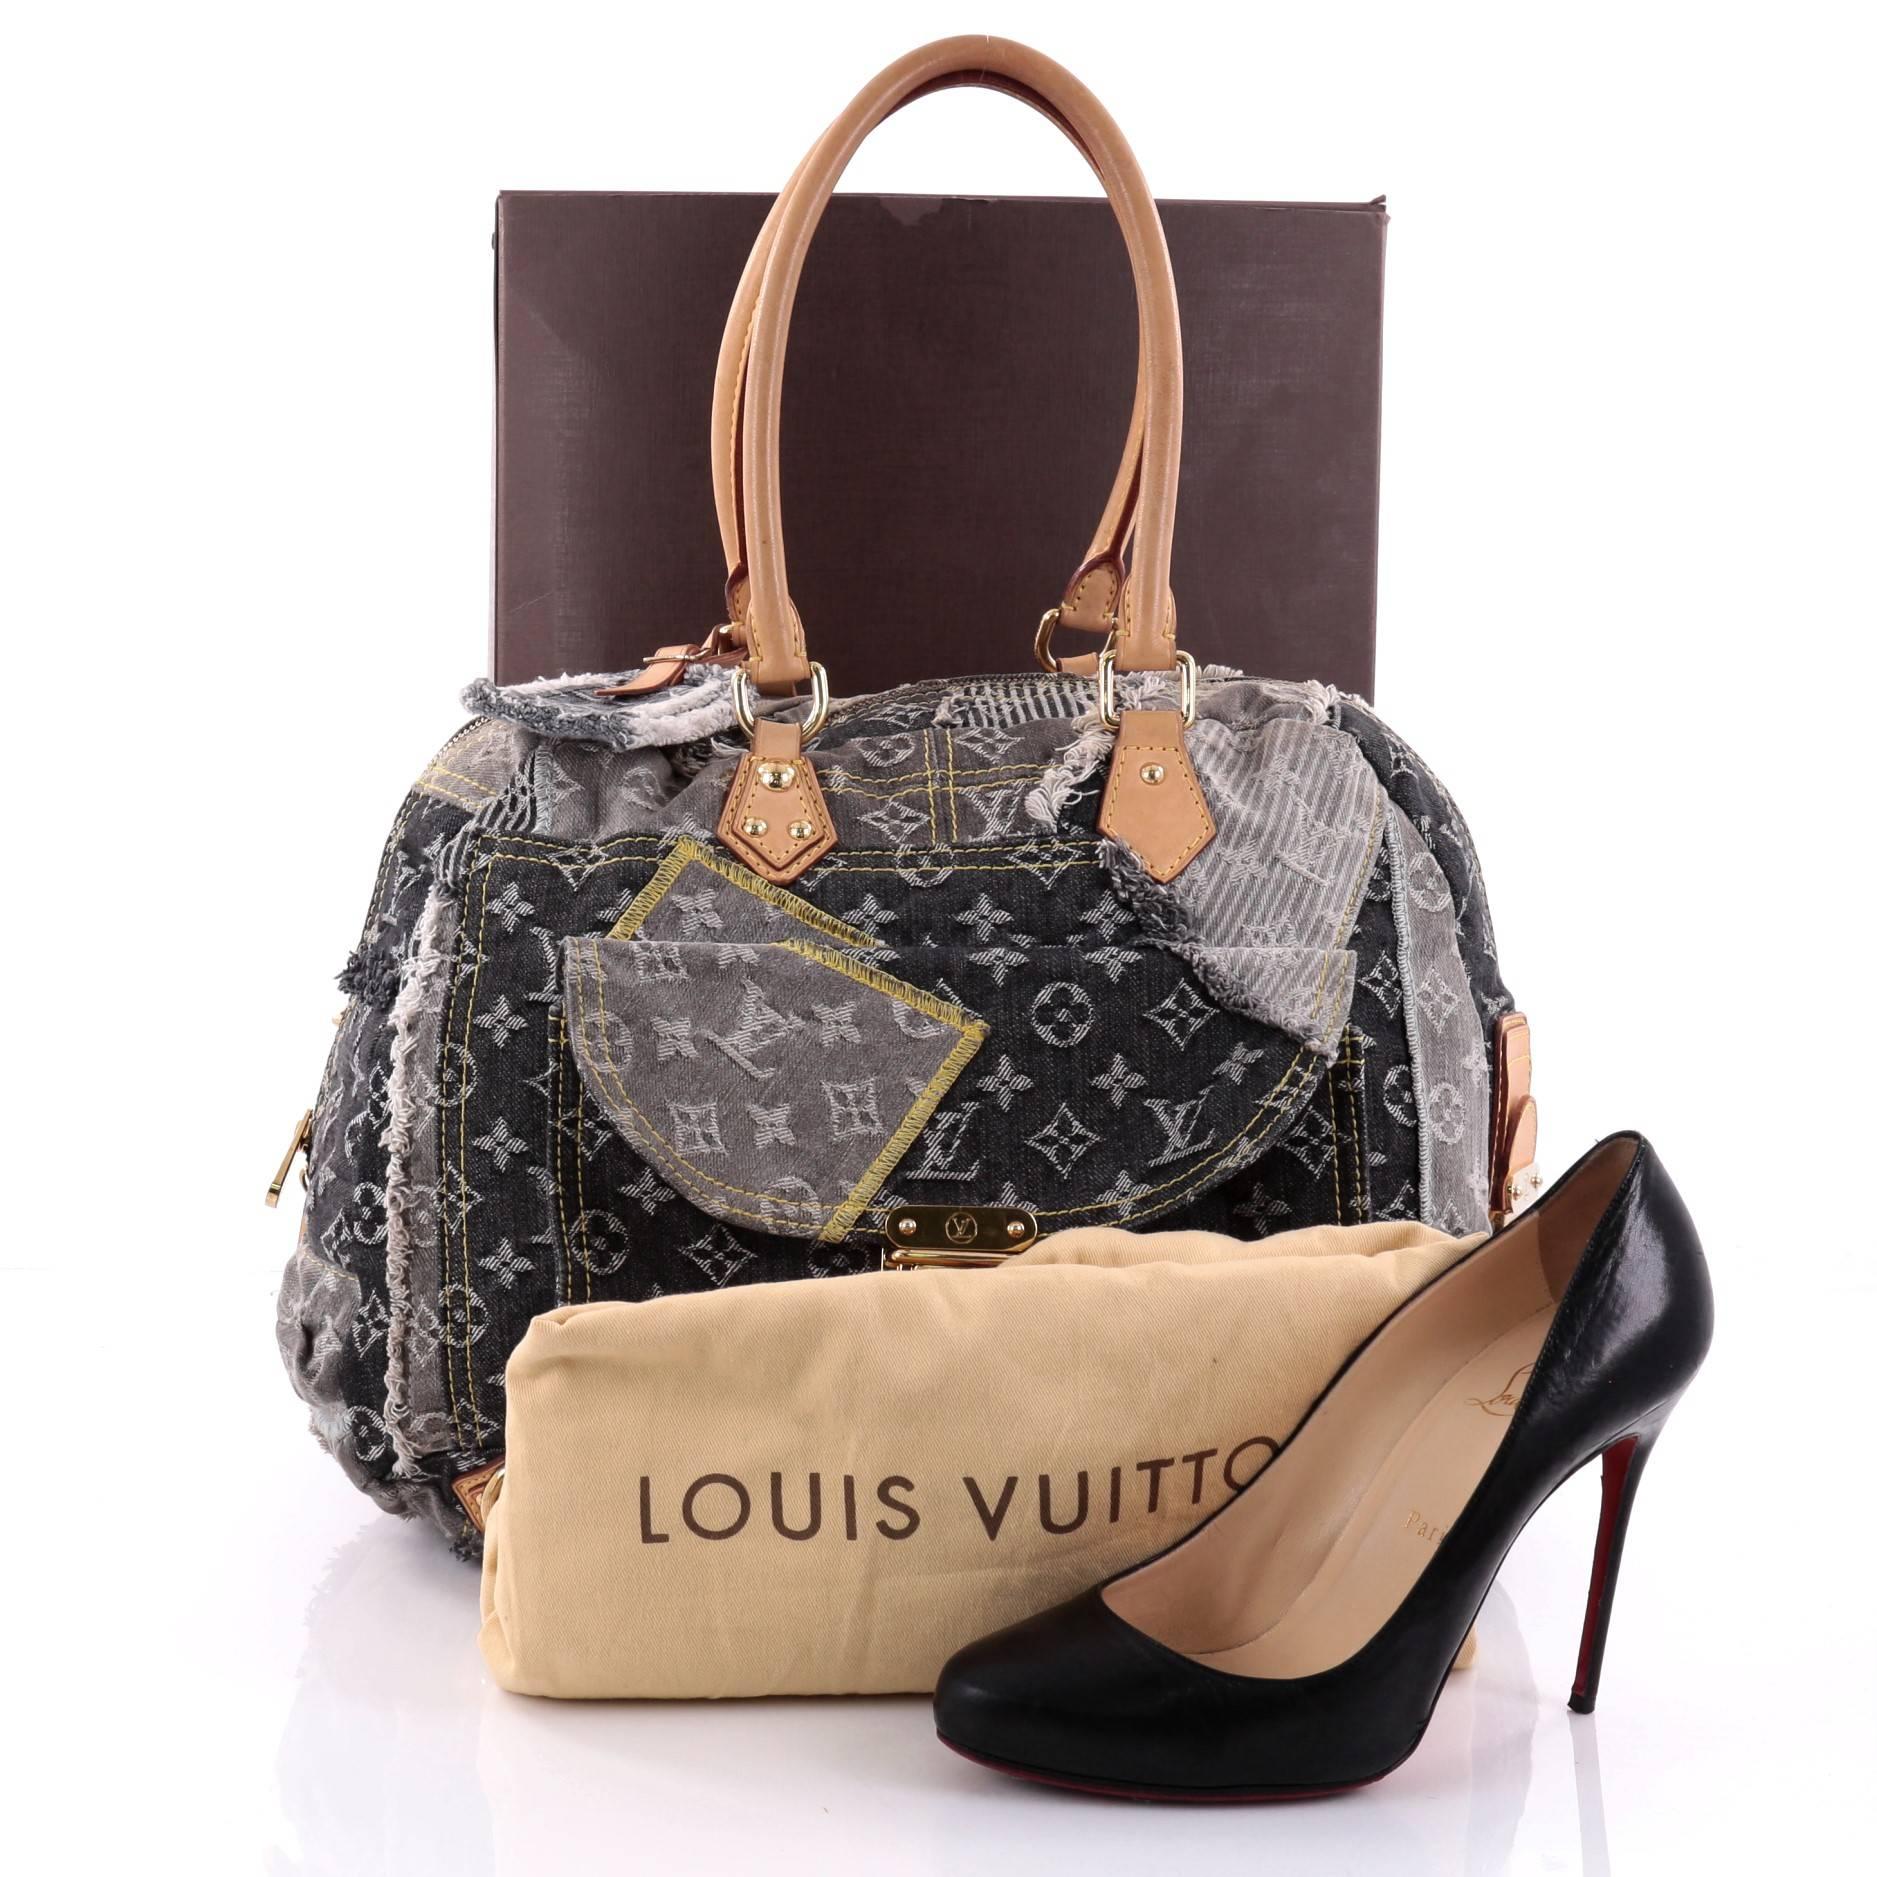 This authentic Louis Vuitton Limited Edition Patchwork Bowly Handbag Denim is a fun and flirty bag from the Louis Vuitton 2006 Spring/Summer Denim collection and is adored by Louis Vuitton lovers everywhere. Crafted in monogram black and grey